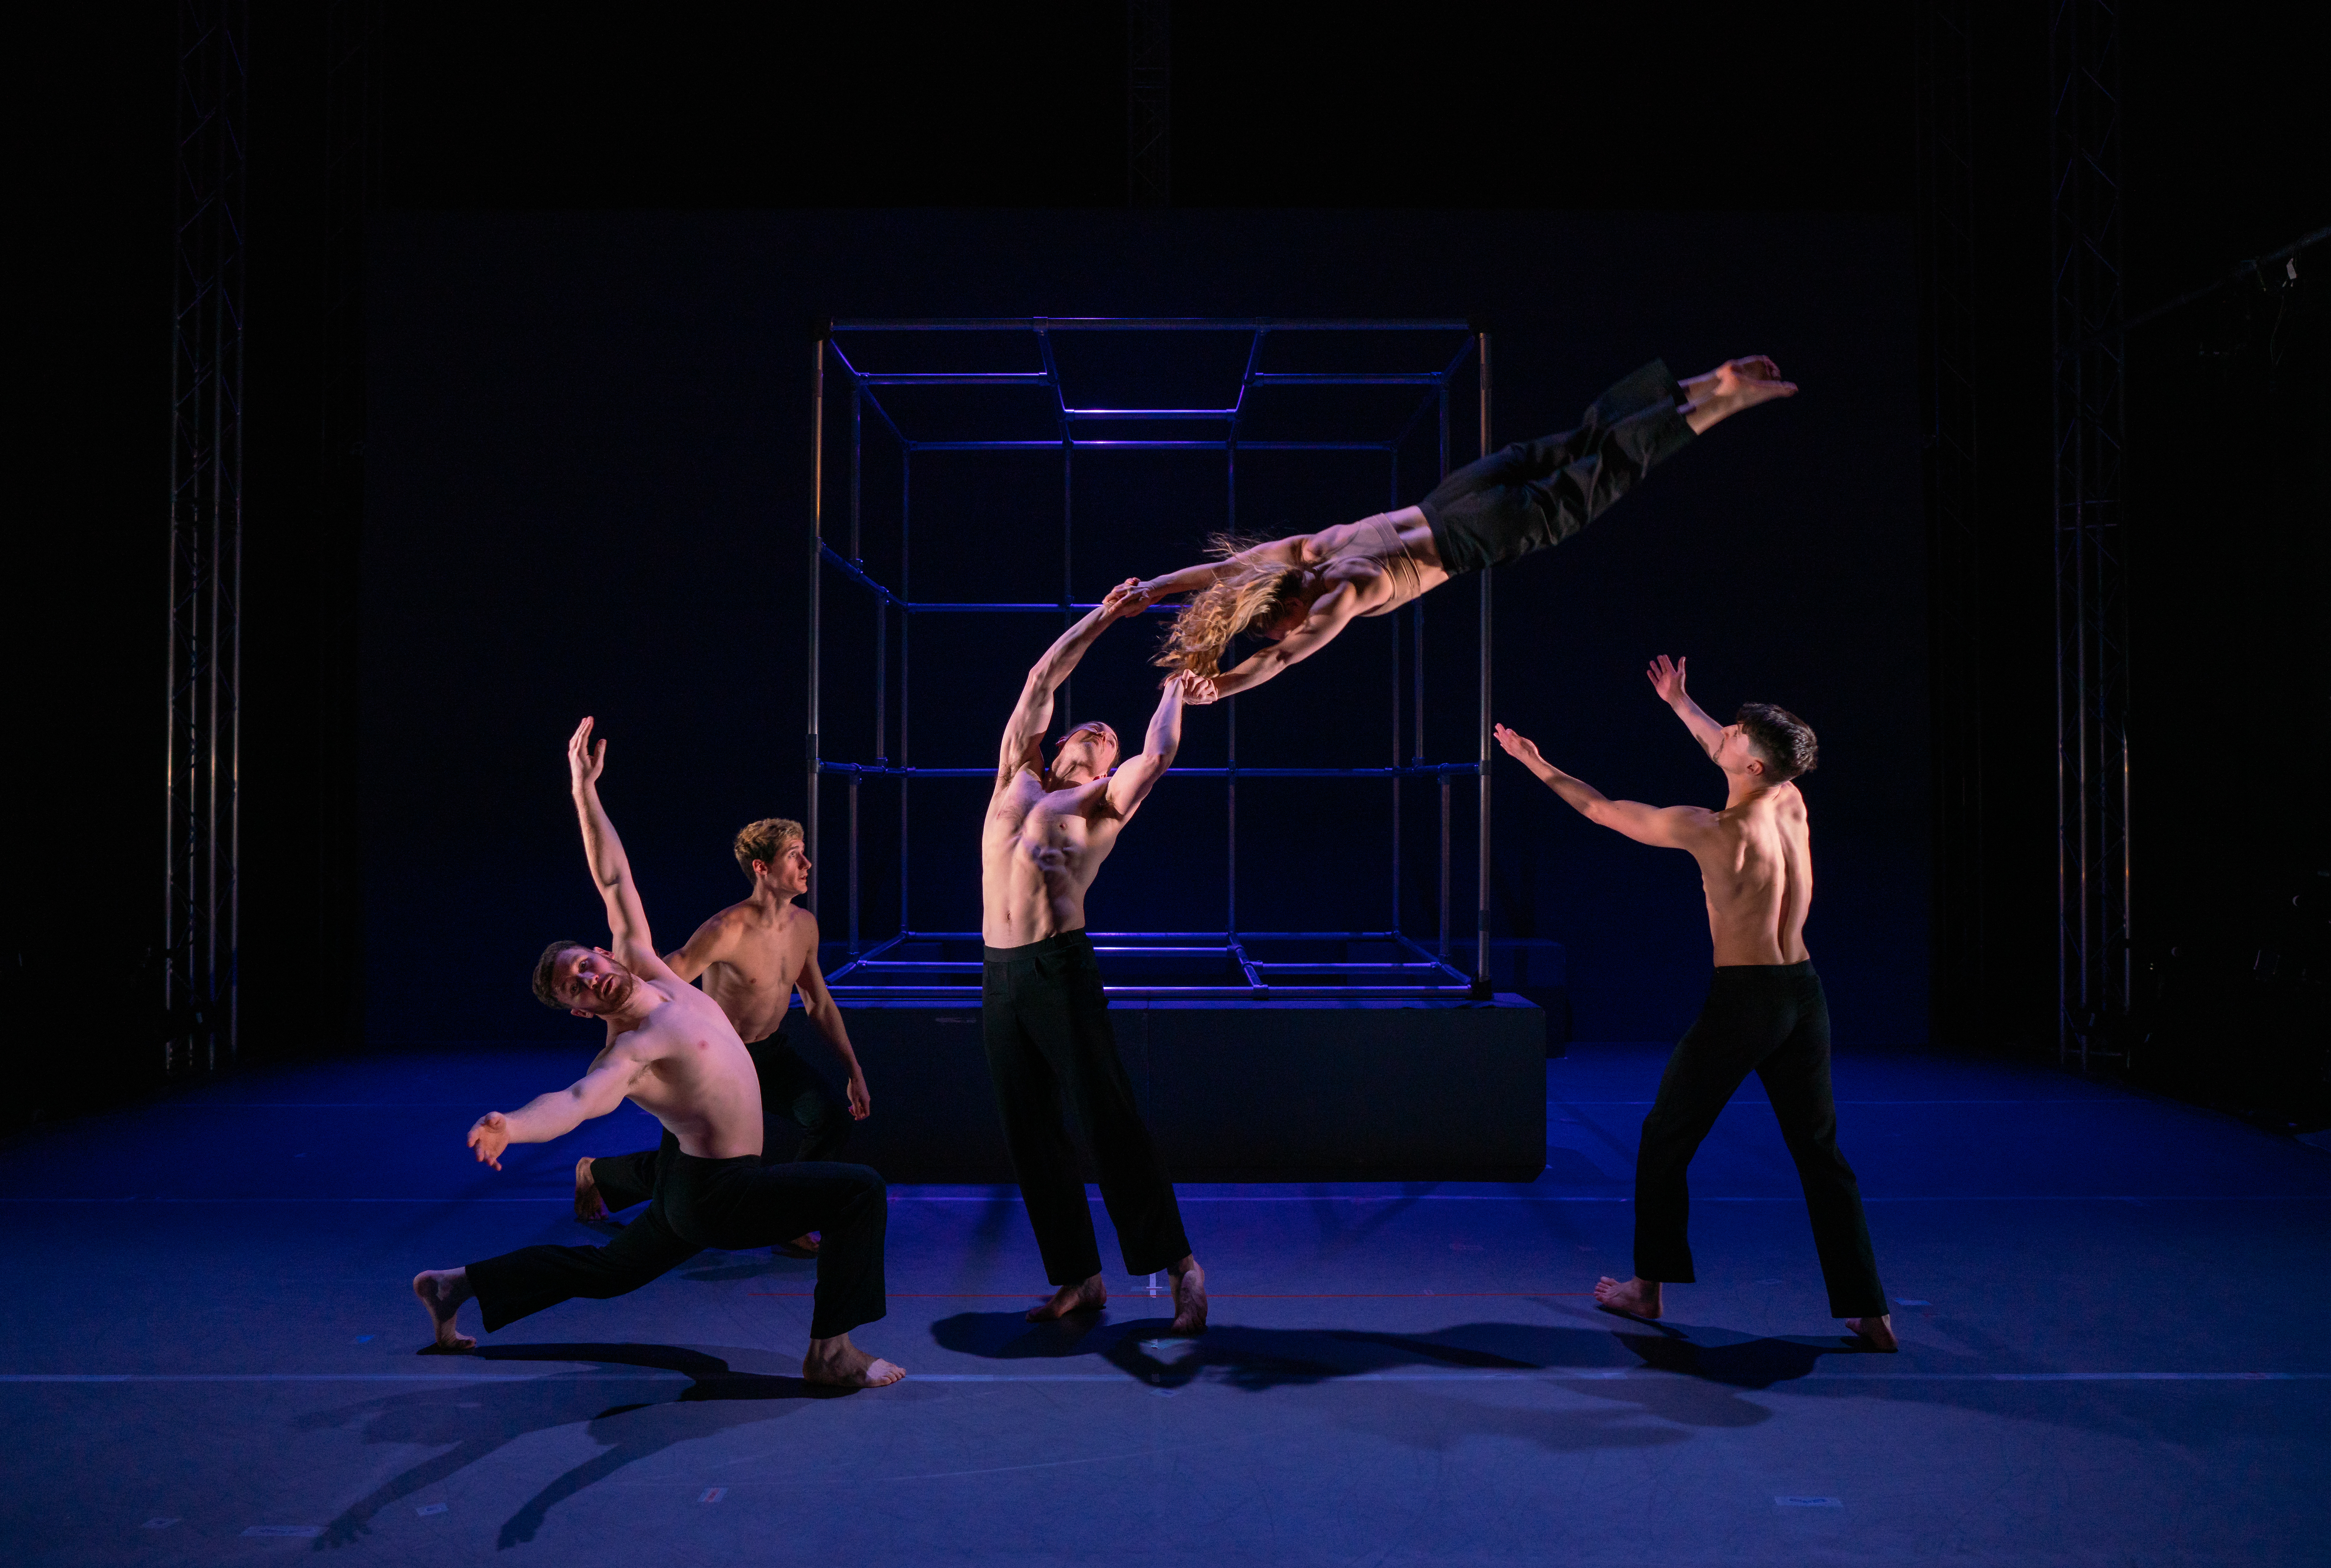 Additional gallery picture 4, Nobody by Motionhouse, image credit Dan Tucker